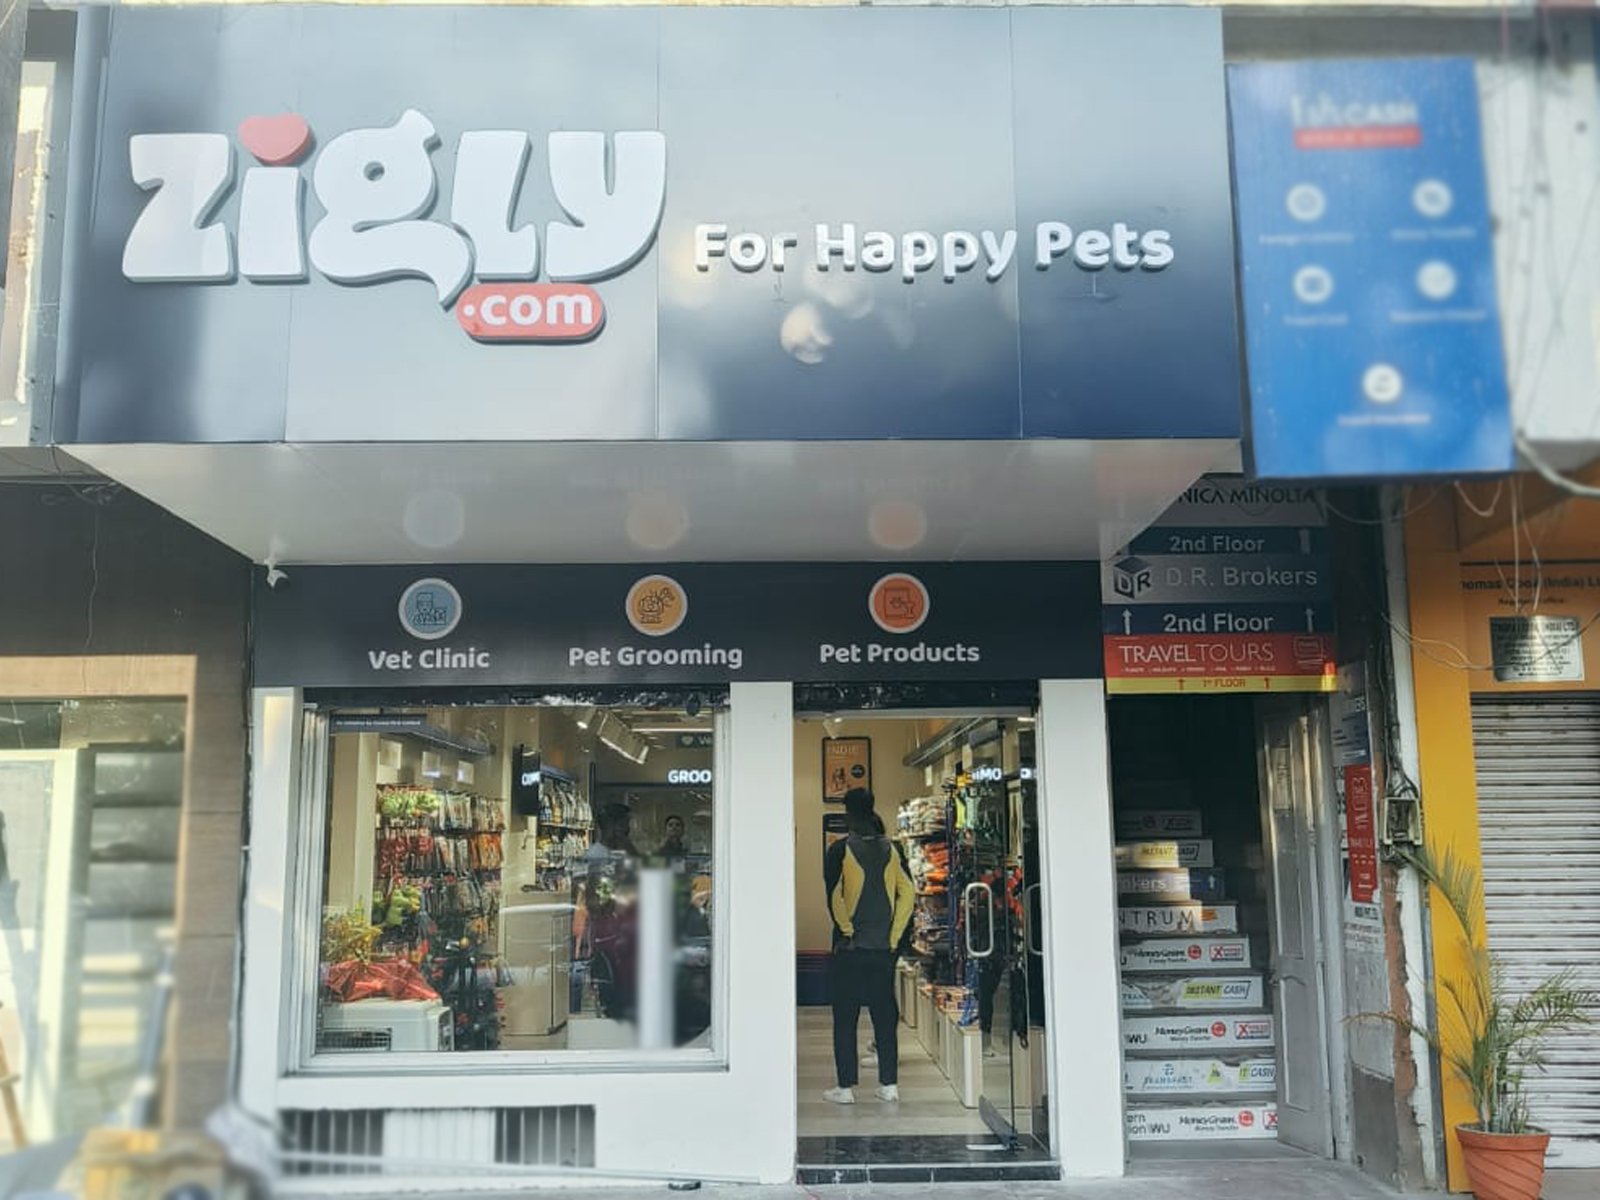 Zigly Sets Its Footprint In Chandigarh With Its First Experience Center in the City